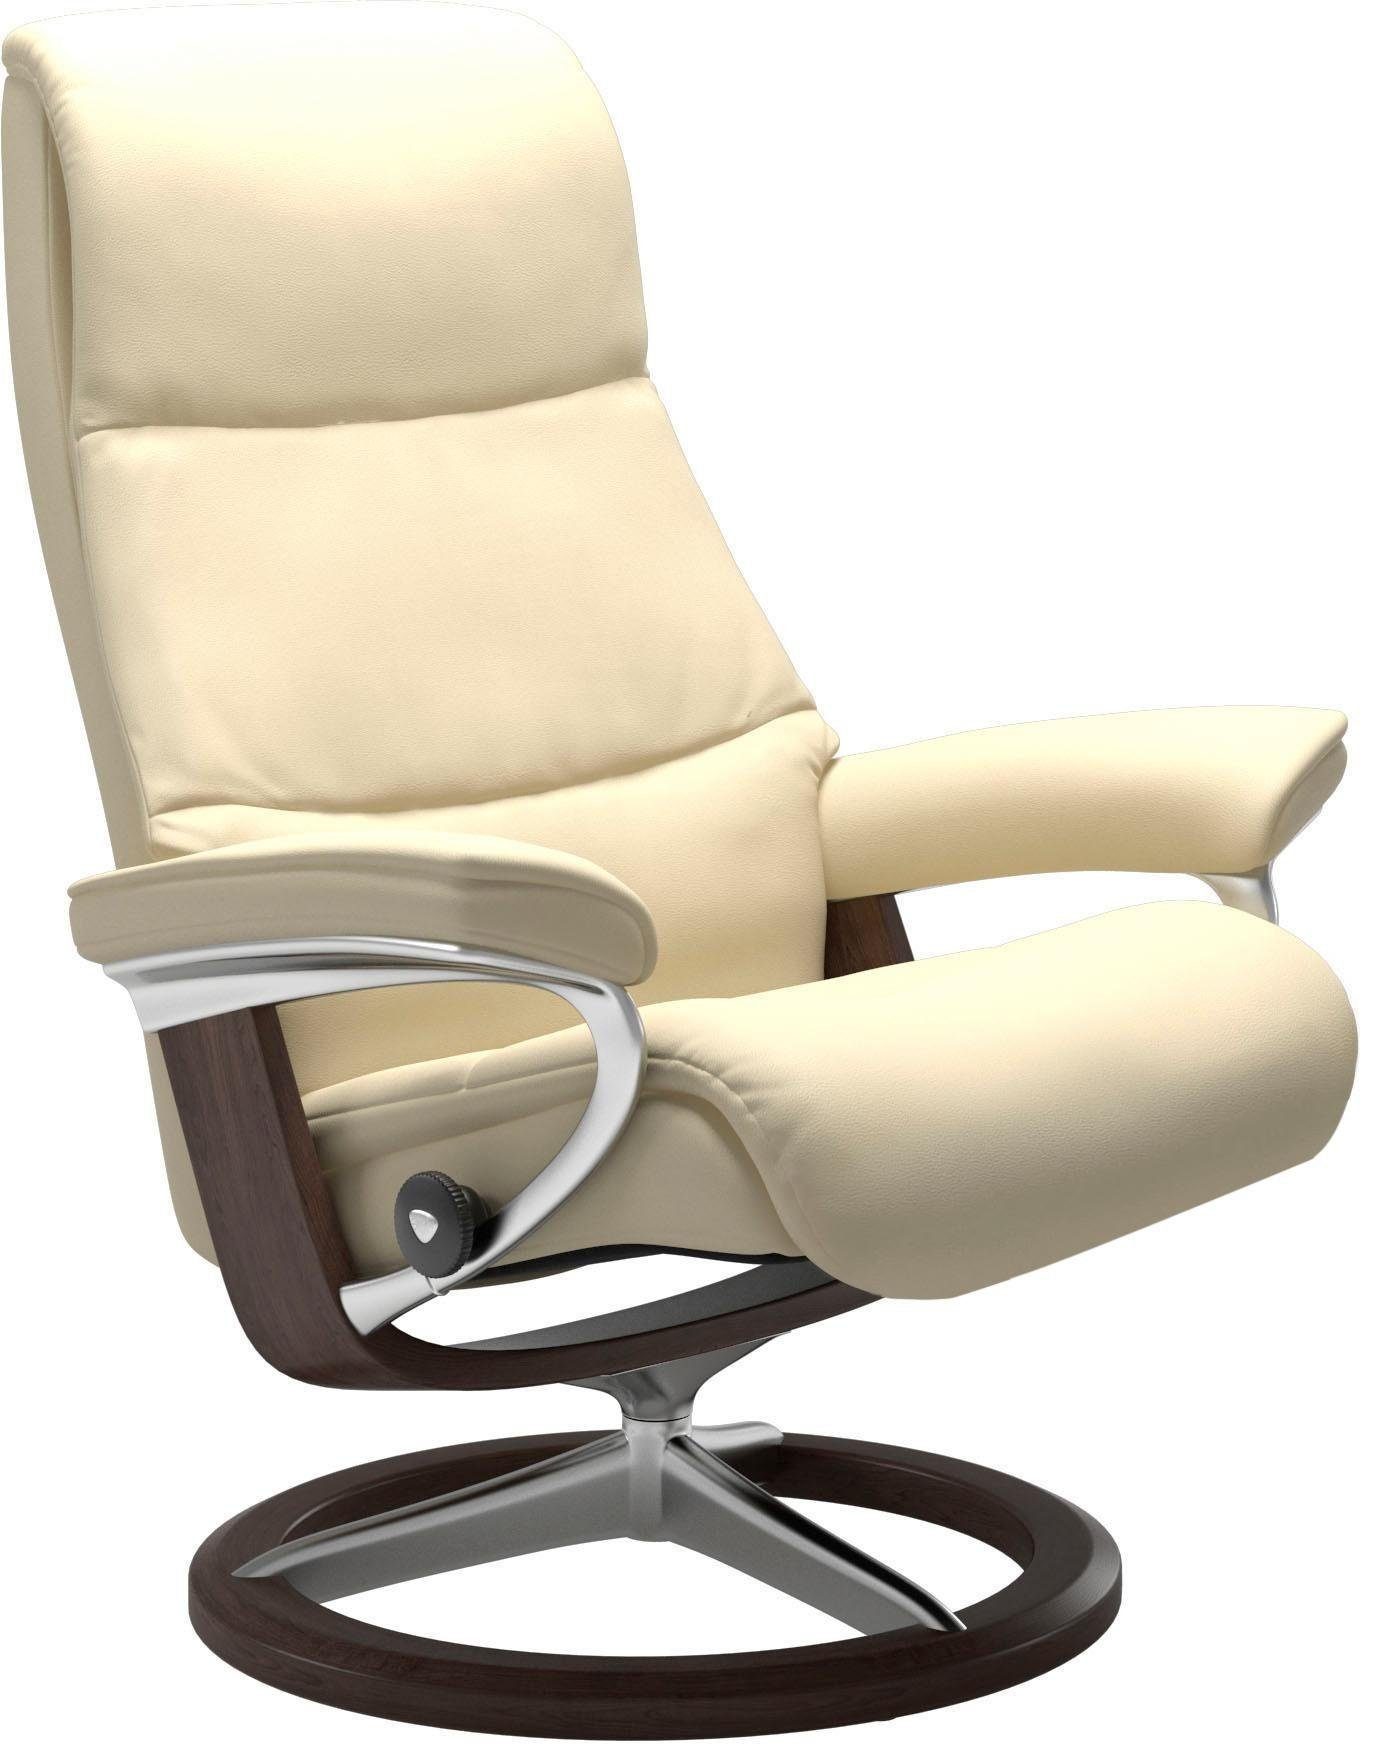 mit View, Größe Signature Base, Relaxsessel Wenge Stressless® S,Gestell